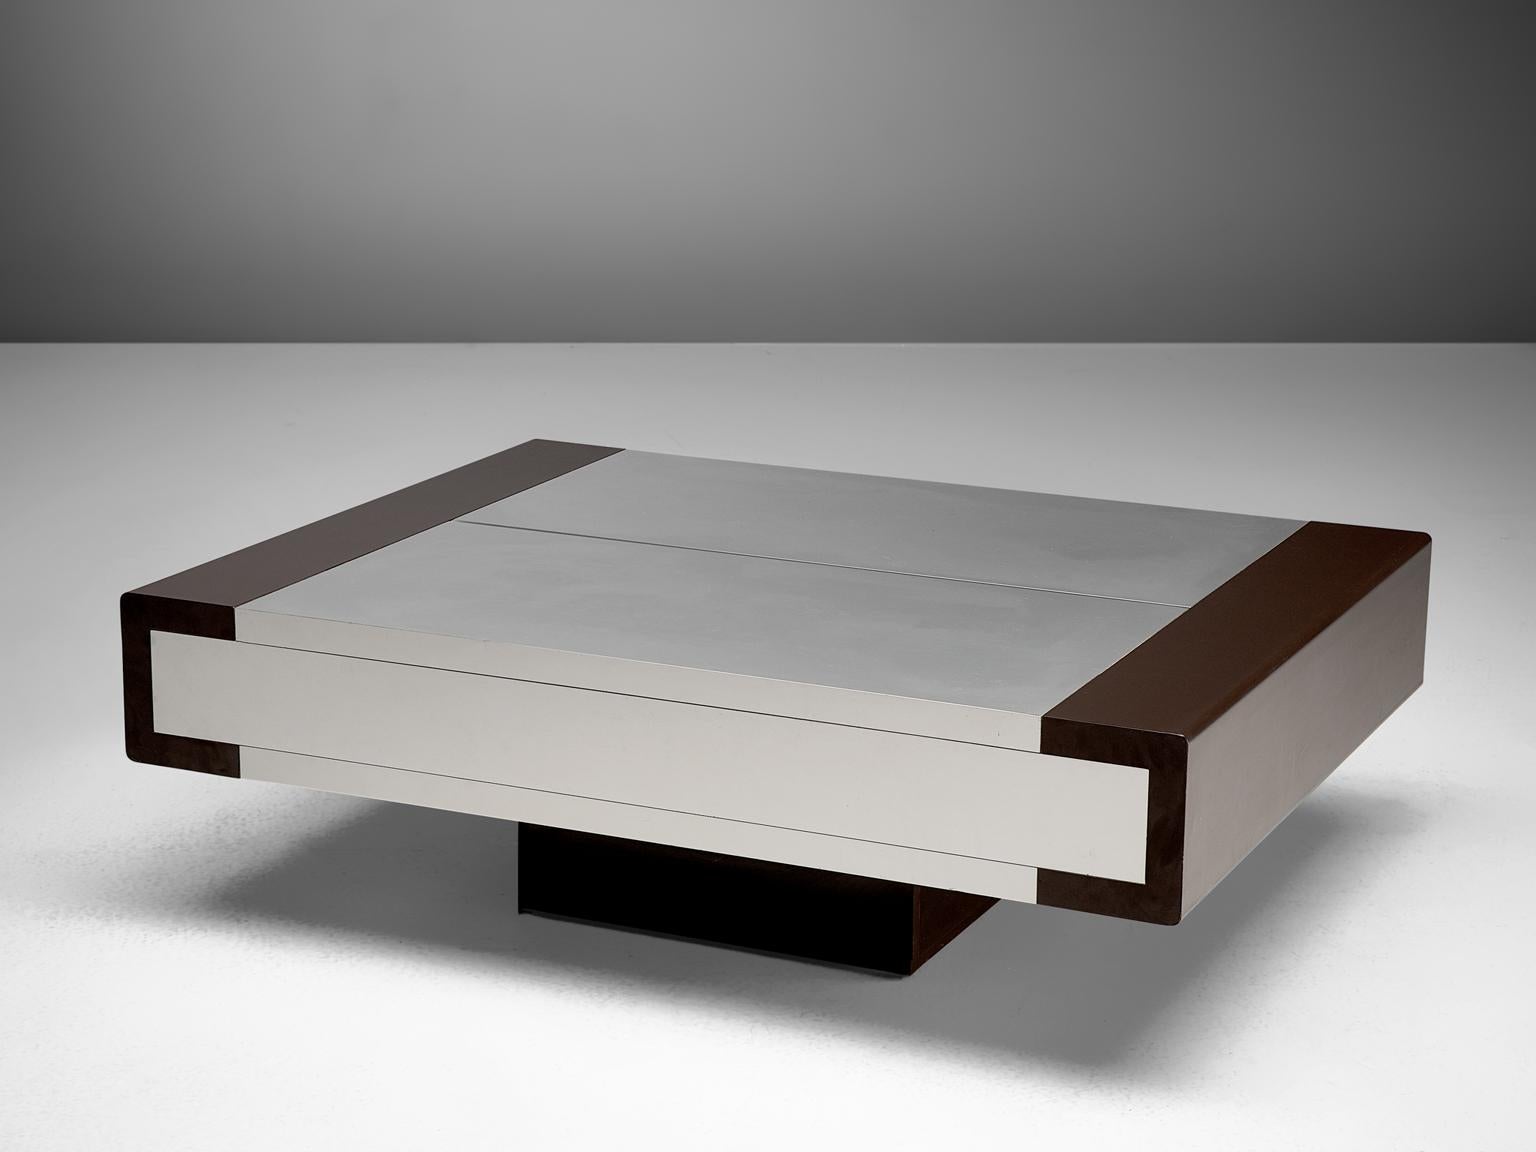 Coffee table, brushed aluminium, Europe, 1970s

This cubist shaped coffee table is executed in strong and materials as brushed aluminium. The table is finished with dark leatherette on the sides. The table top is extendable, in which appears a